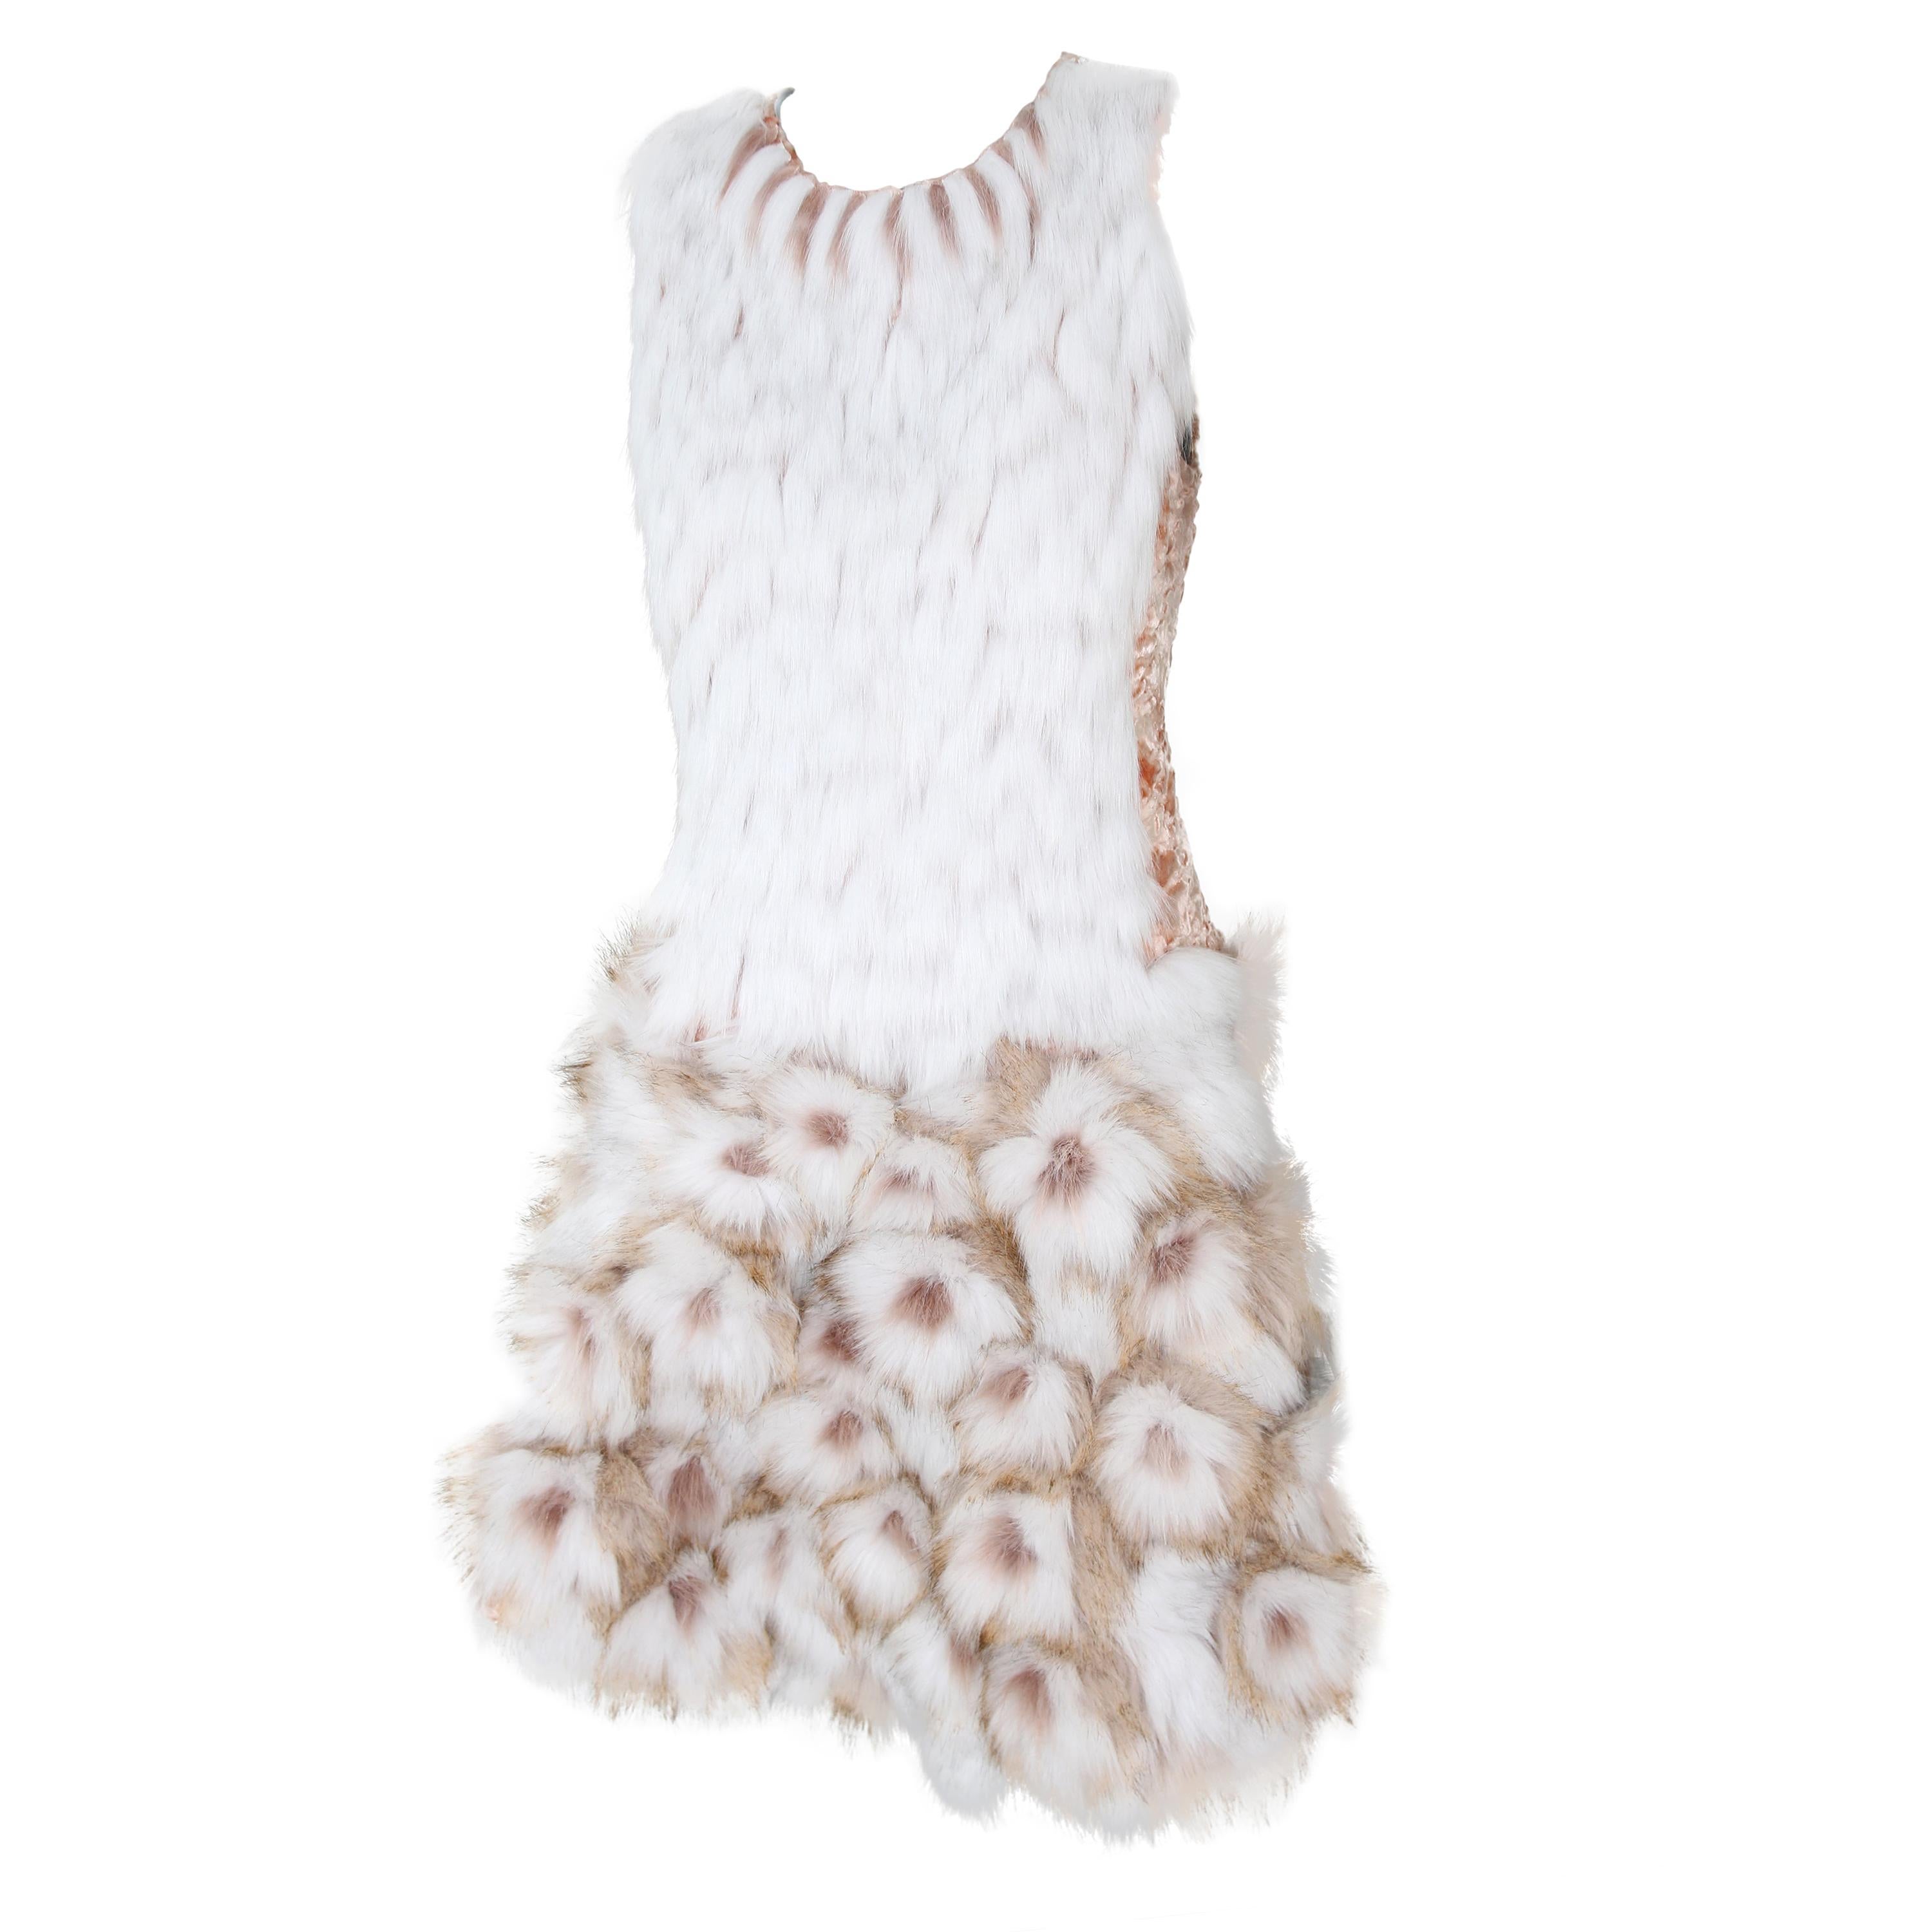 Pelush Couture White Faux Fur Dress With Three Dimensional Flowers - Small